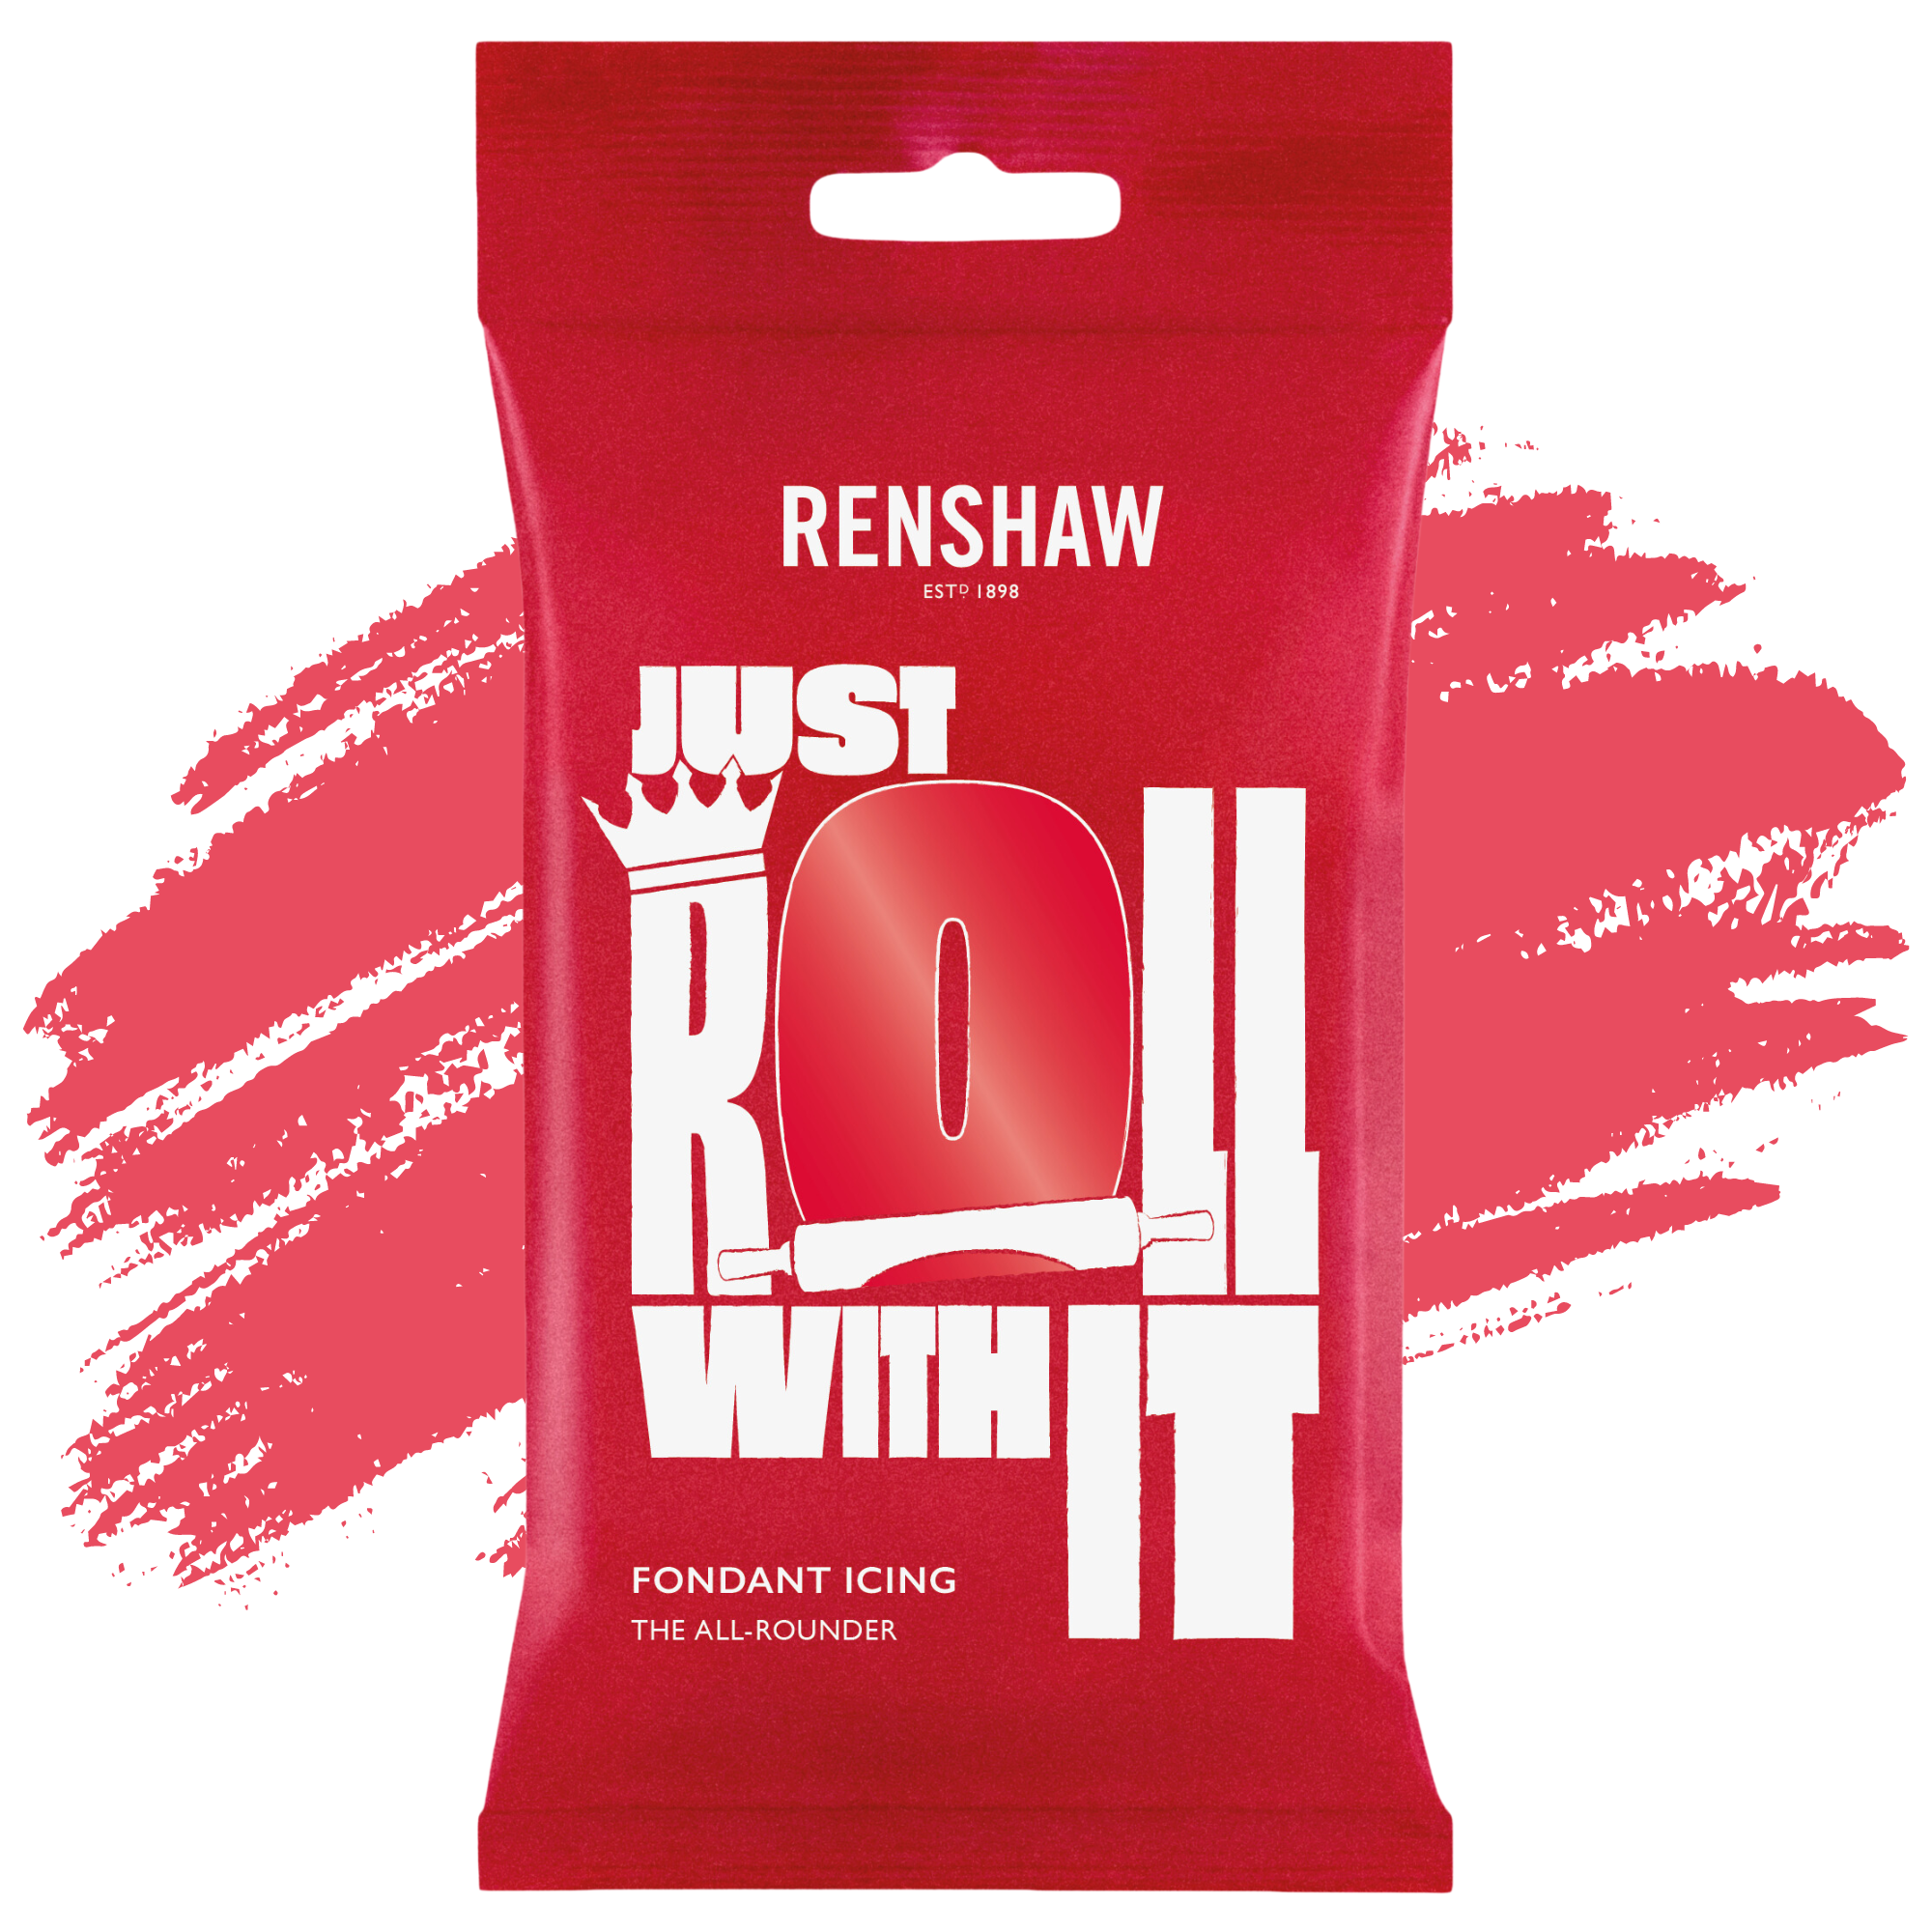 Renshaw Professional Sugar Paste Ready to Roll Fondant Just Roll with it Icing - Poppy Red - 250g